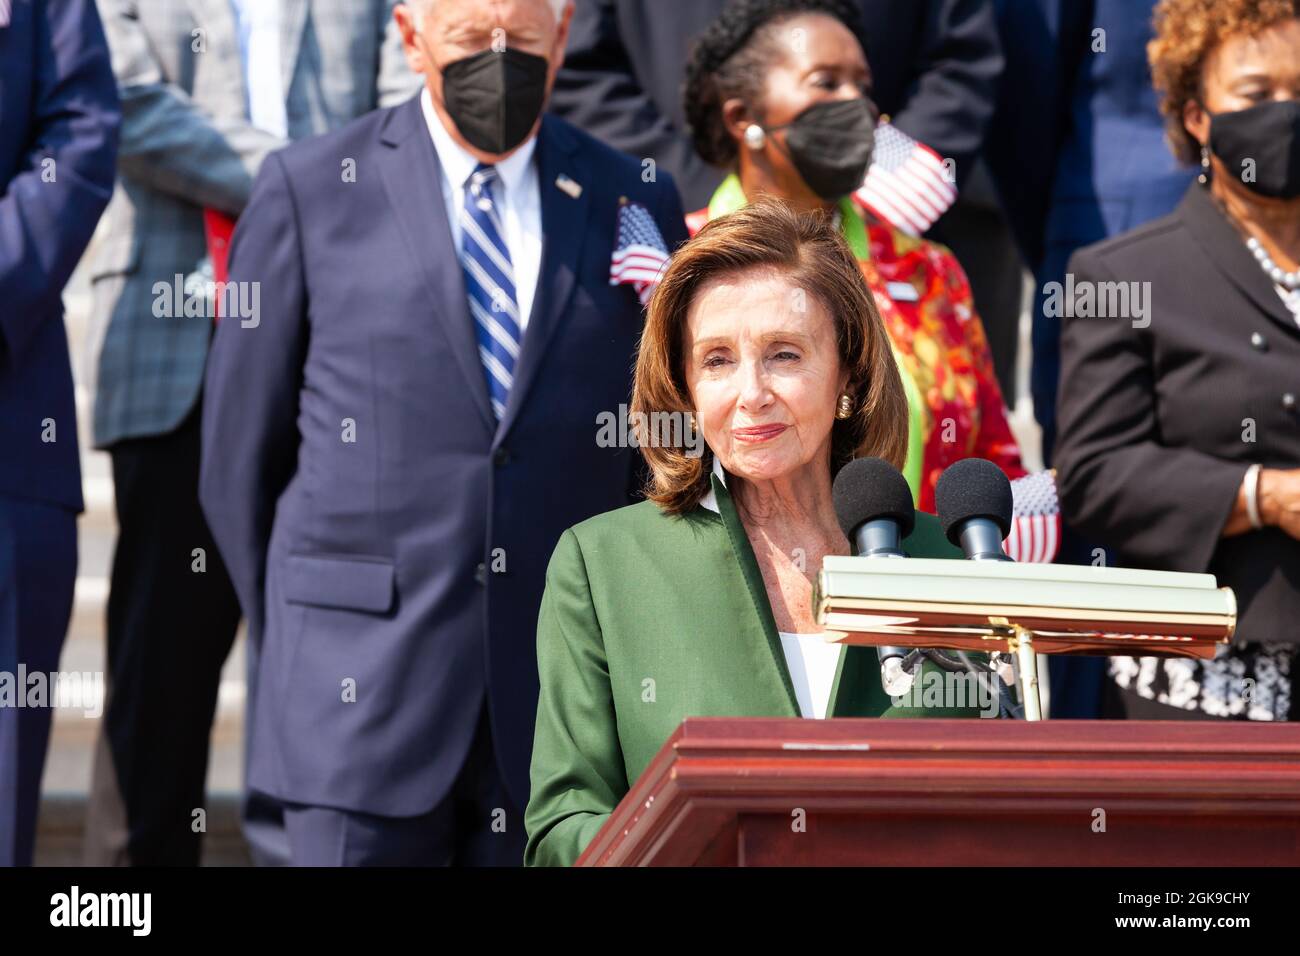 Washington DC, USA. 13th Sep 2021. House Speaker Nancy Pelosi, Democrat of California, delivers remakrs during a ceremony on the Capitol steps in remembrance of the victims of the September 11th attacks. Credit: Allison Bailey/Alamy Live News Stock Photo